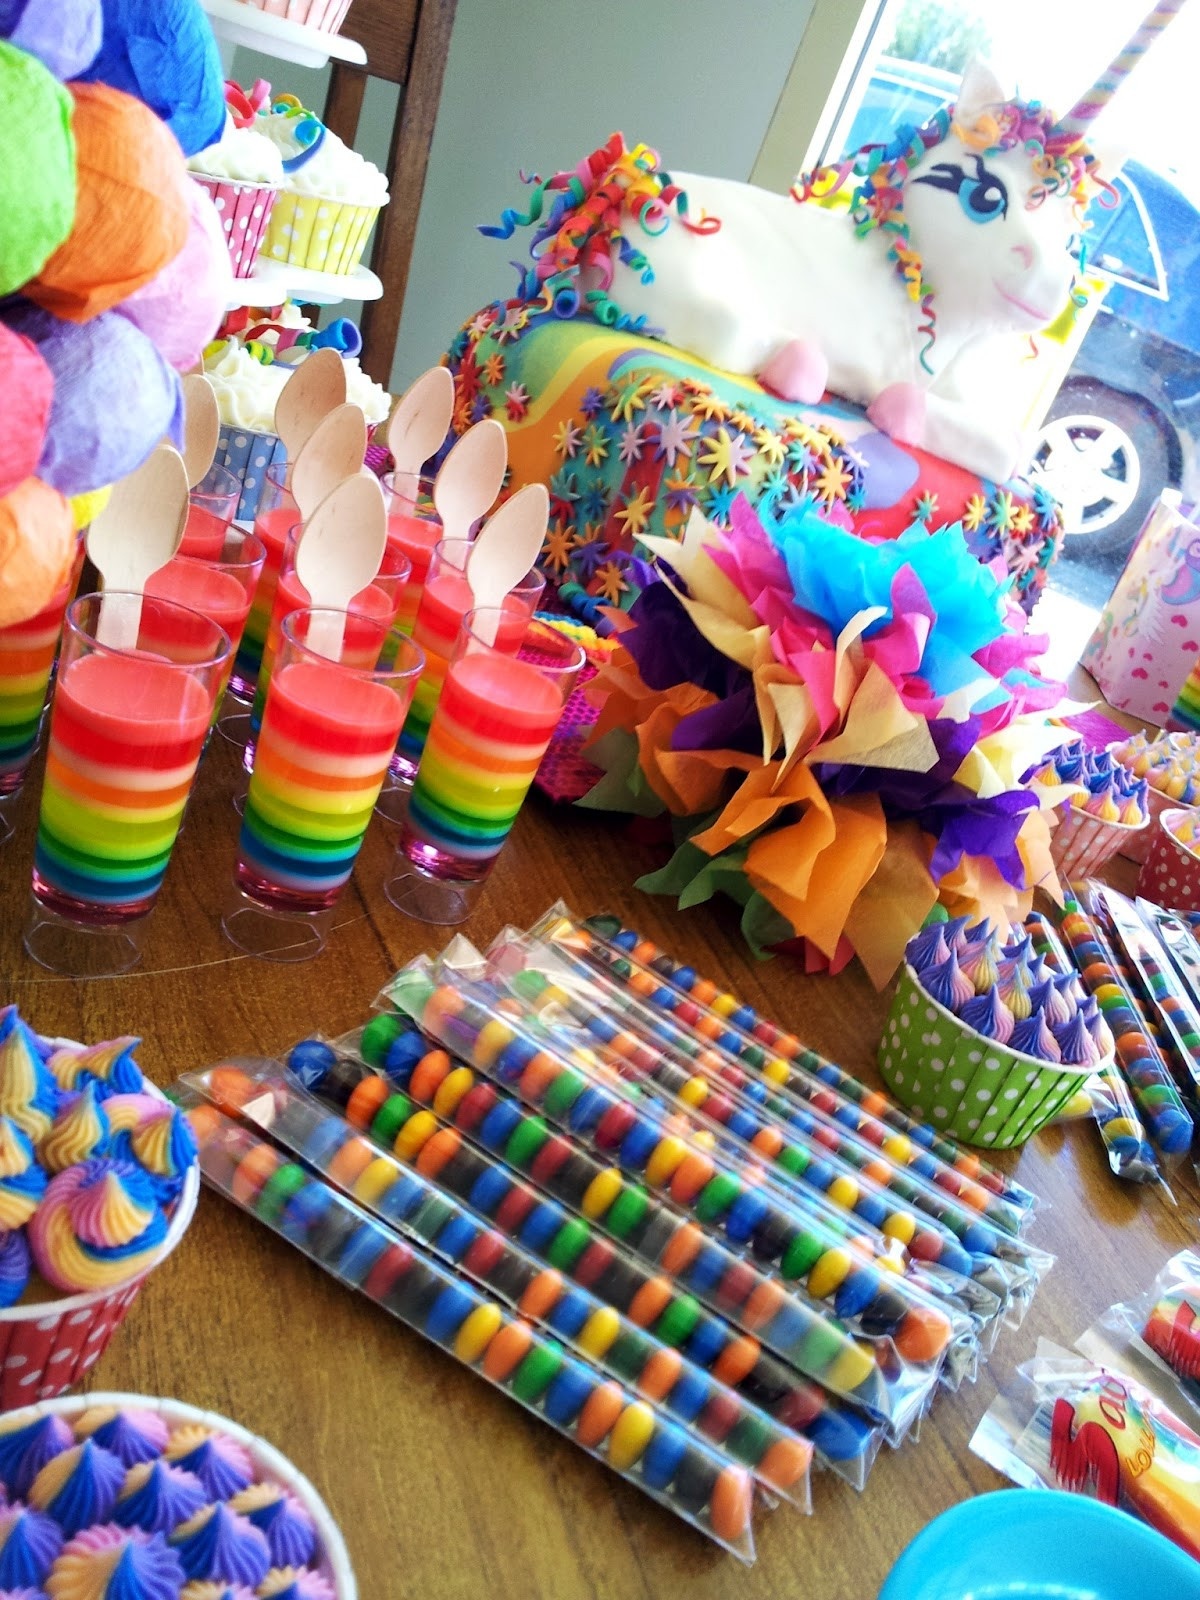 Rainbow Unicorn Birthday Party Ideas
 The Quick Unpick Five FIVE A party rainbows and a